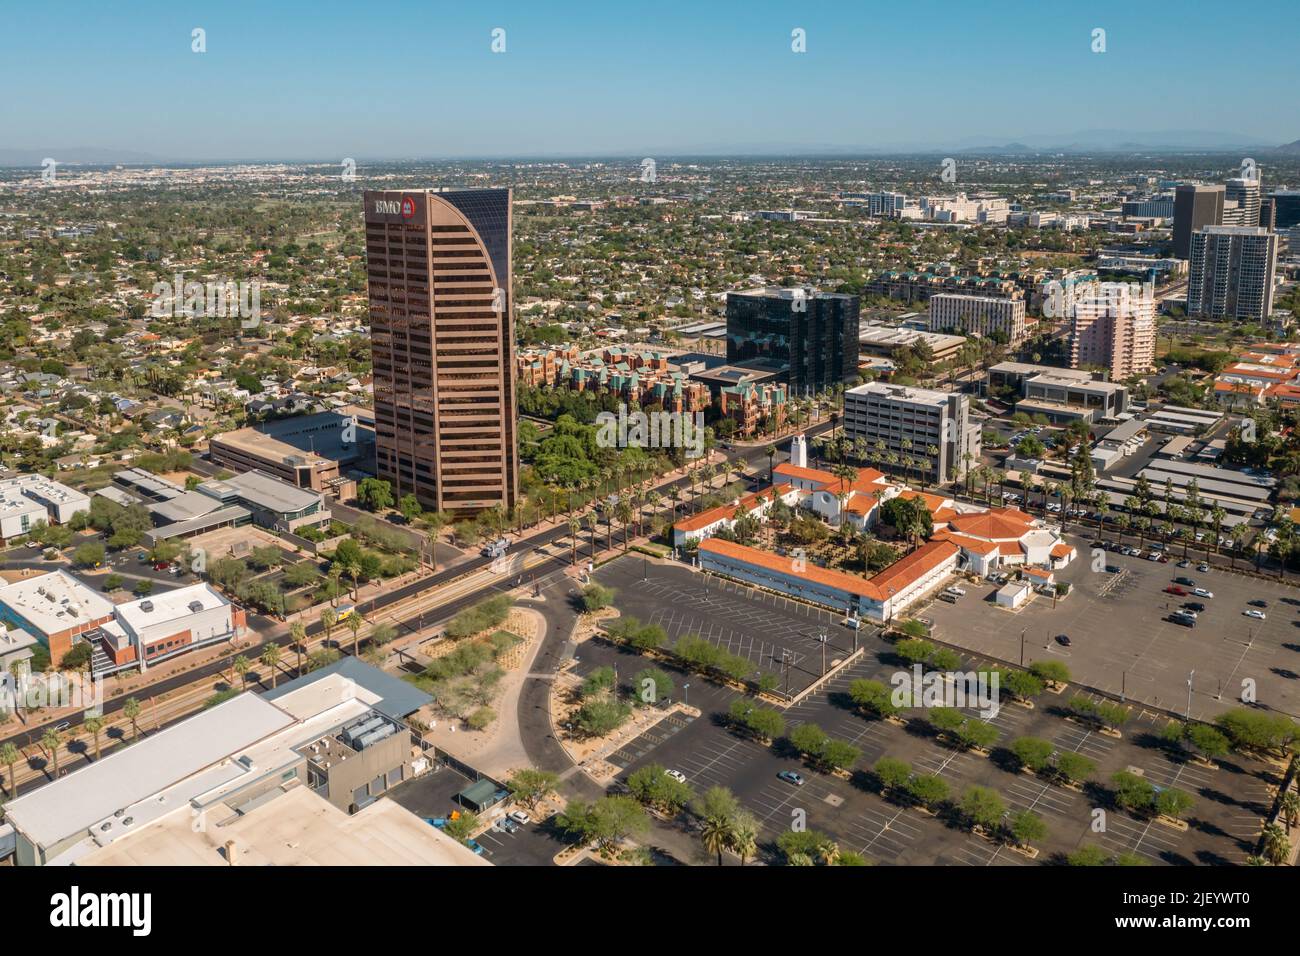 Aerial View Of BMO Tower And Central United Methodist Church in Phoenix, Arizona, USA. Stock Photo